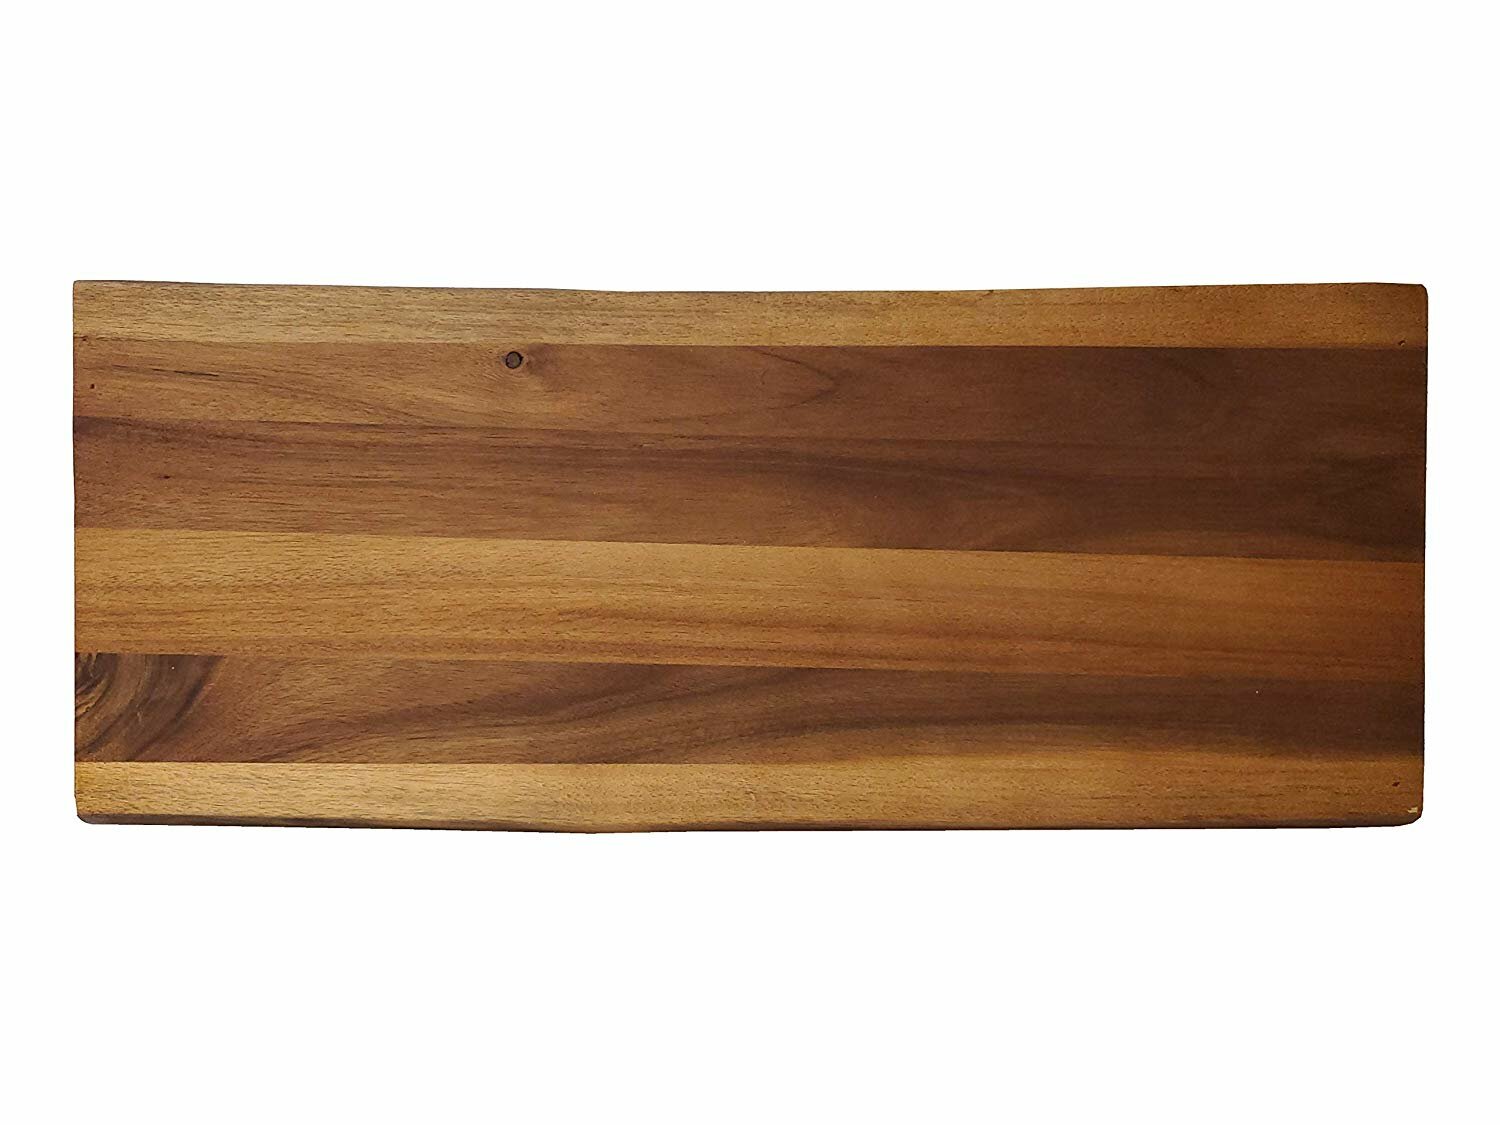 Denmark Tools for Cooks Artisanal Acacia Serving Collection- Wood Cutting  Chopping Board Platter Tray, Large Rectangular Footed Charcuterie/Cutting  Board Set of 2 